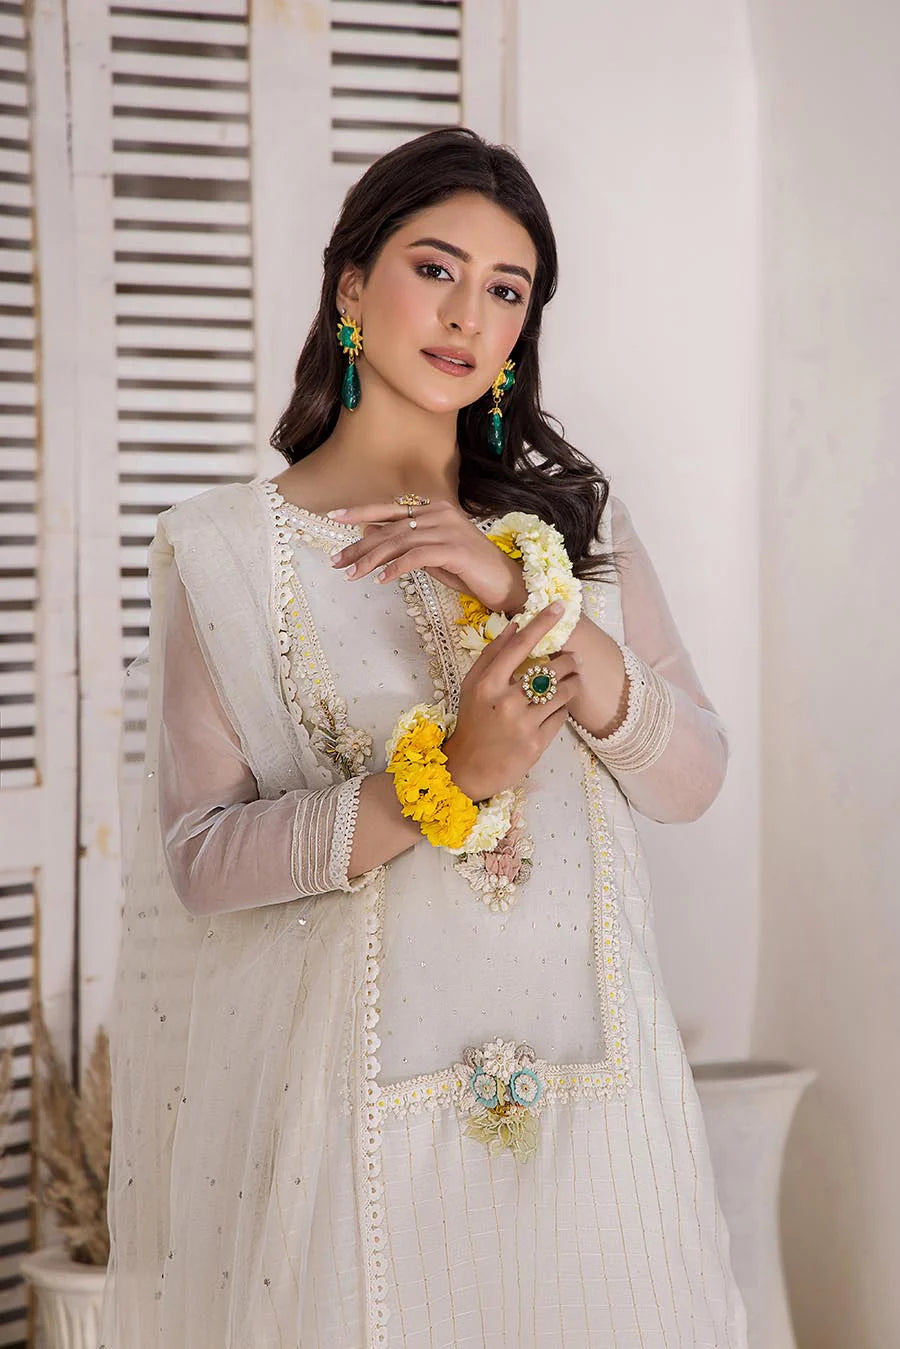 KHUDA BAKSH Ready To Wear woman in a white dress with yellow flowers